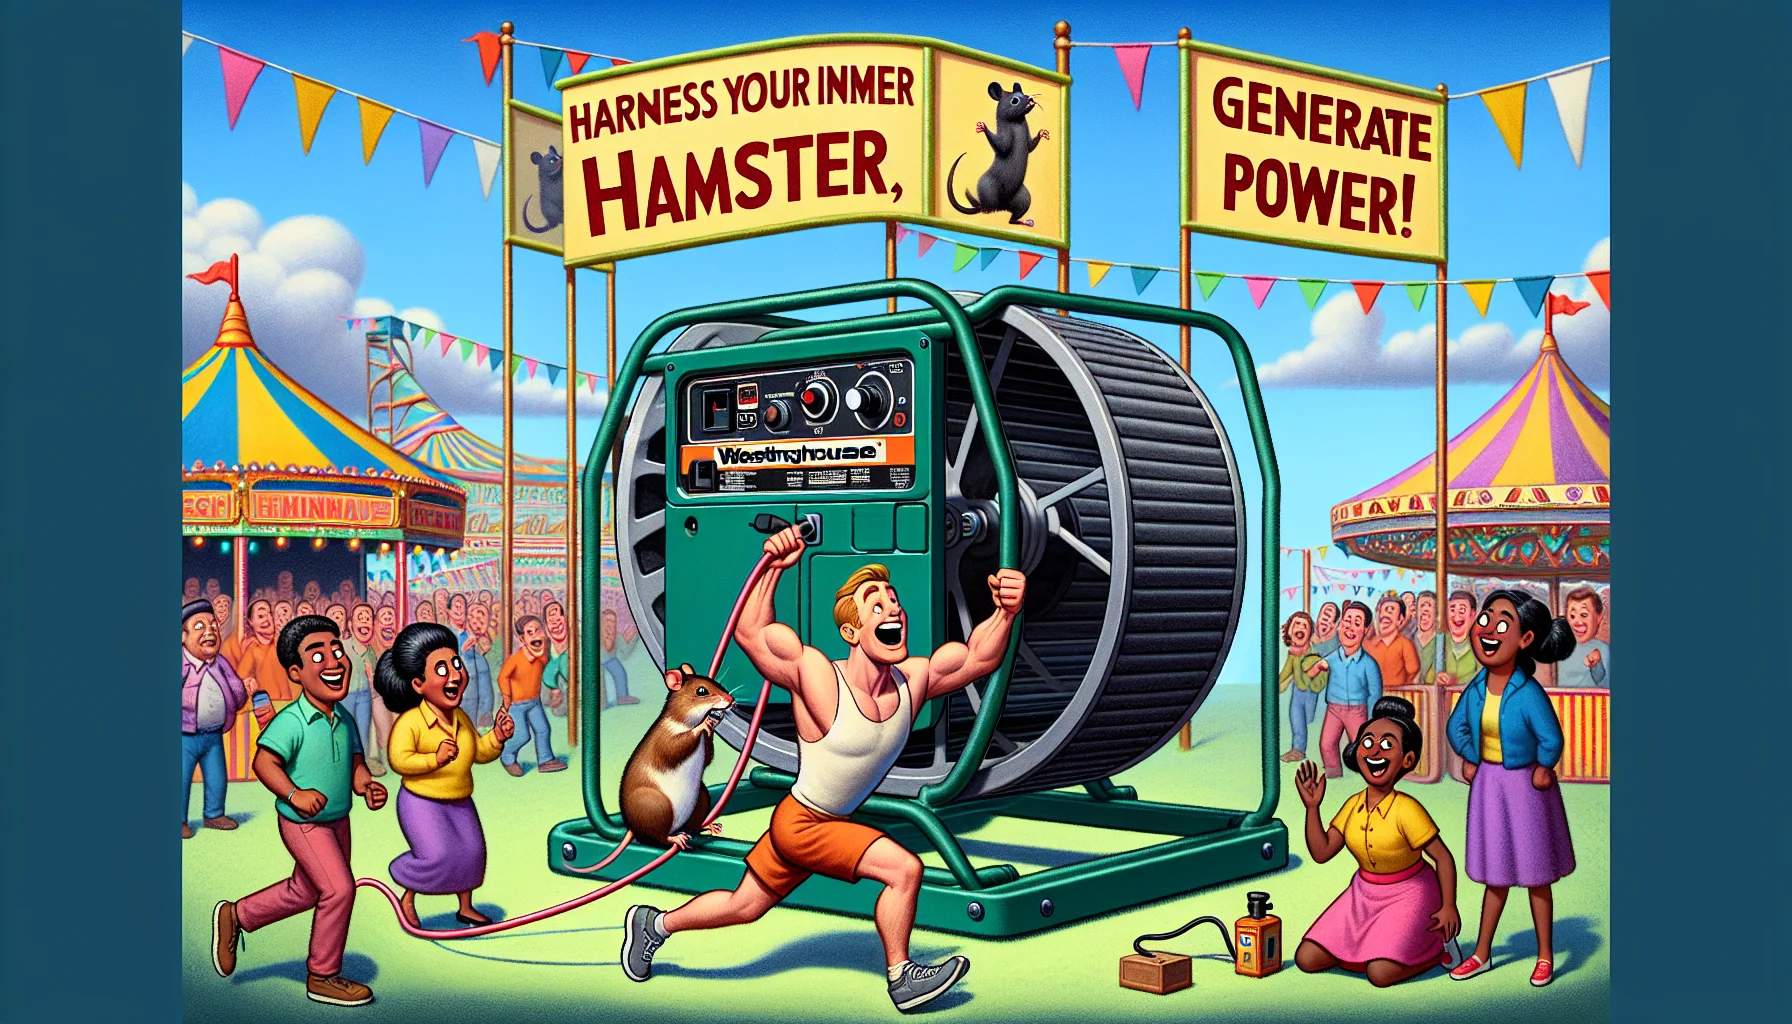 A satirical image of a generic portable generator, similar to the Westinghouse 9500 model, having a pivotal role in a fun-filled scene! Picture this: It's set in a colorful carnival setting. There's a jovial, athletic Caucasian man trying to power the generator by running on a huge hamster wheel attached to it. Onlookers, including an intrigued South Asian woman and a laughing Black child, are having a great time watching this unusual setup. The large signboard behind the generator reads: 'Harness Your Inner Hamster, Generate Power!' The scene captures the fun in generating electricity while also highlighting the versatility of the generator.